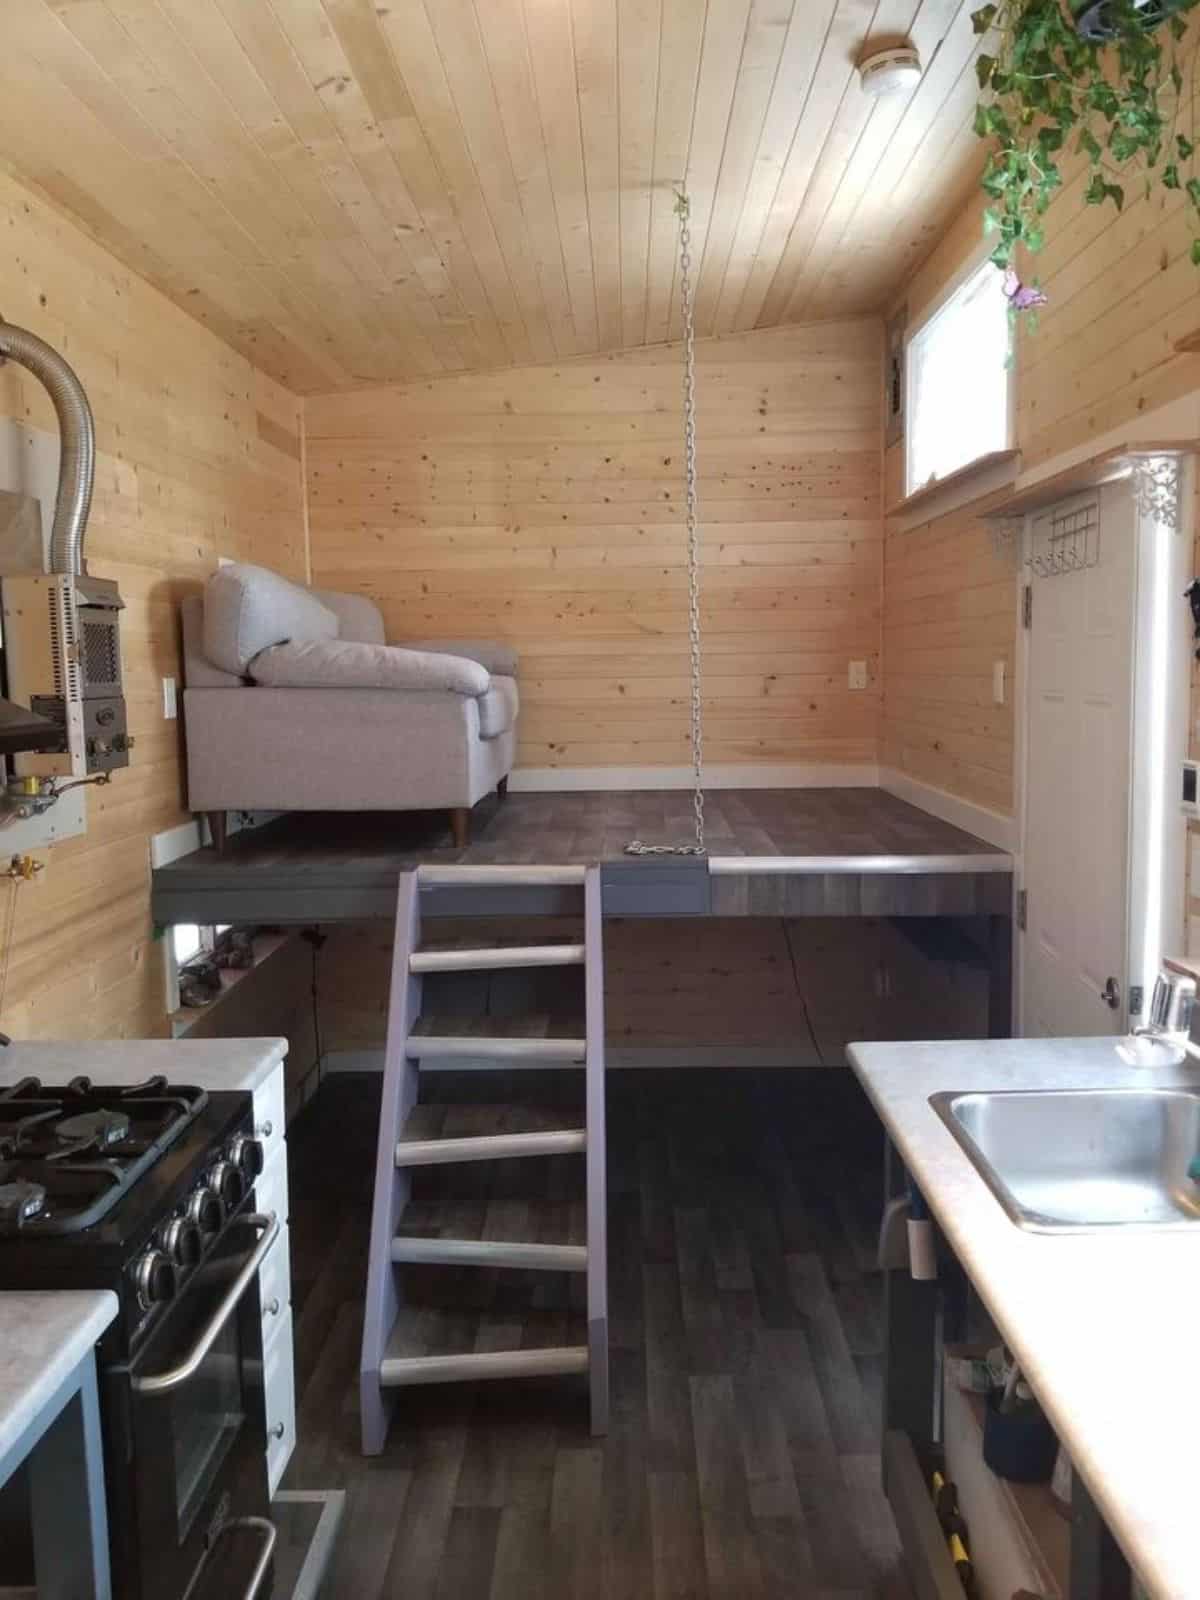 living area of tiny home in British Columbia is cleverly designed